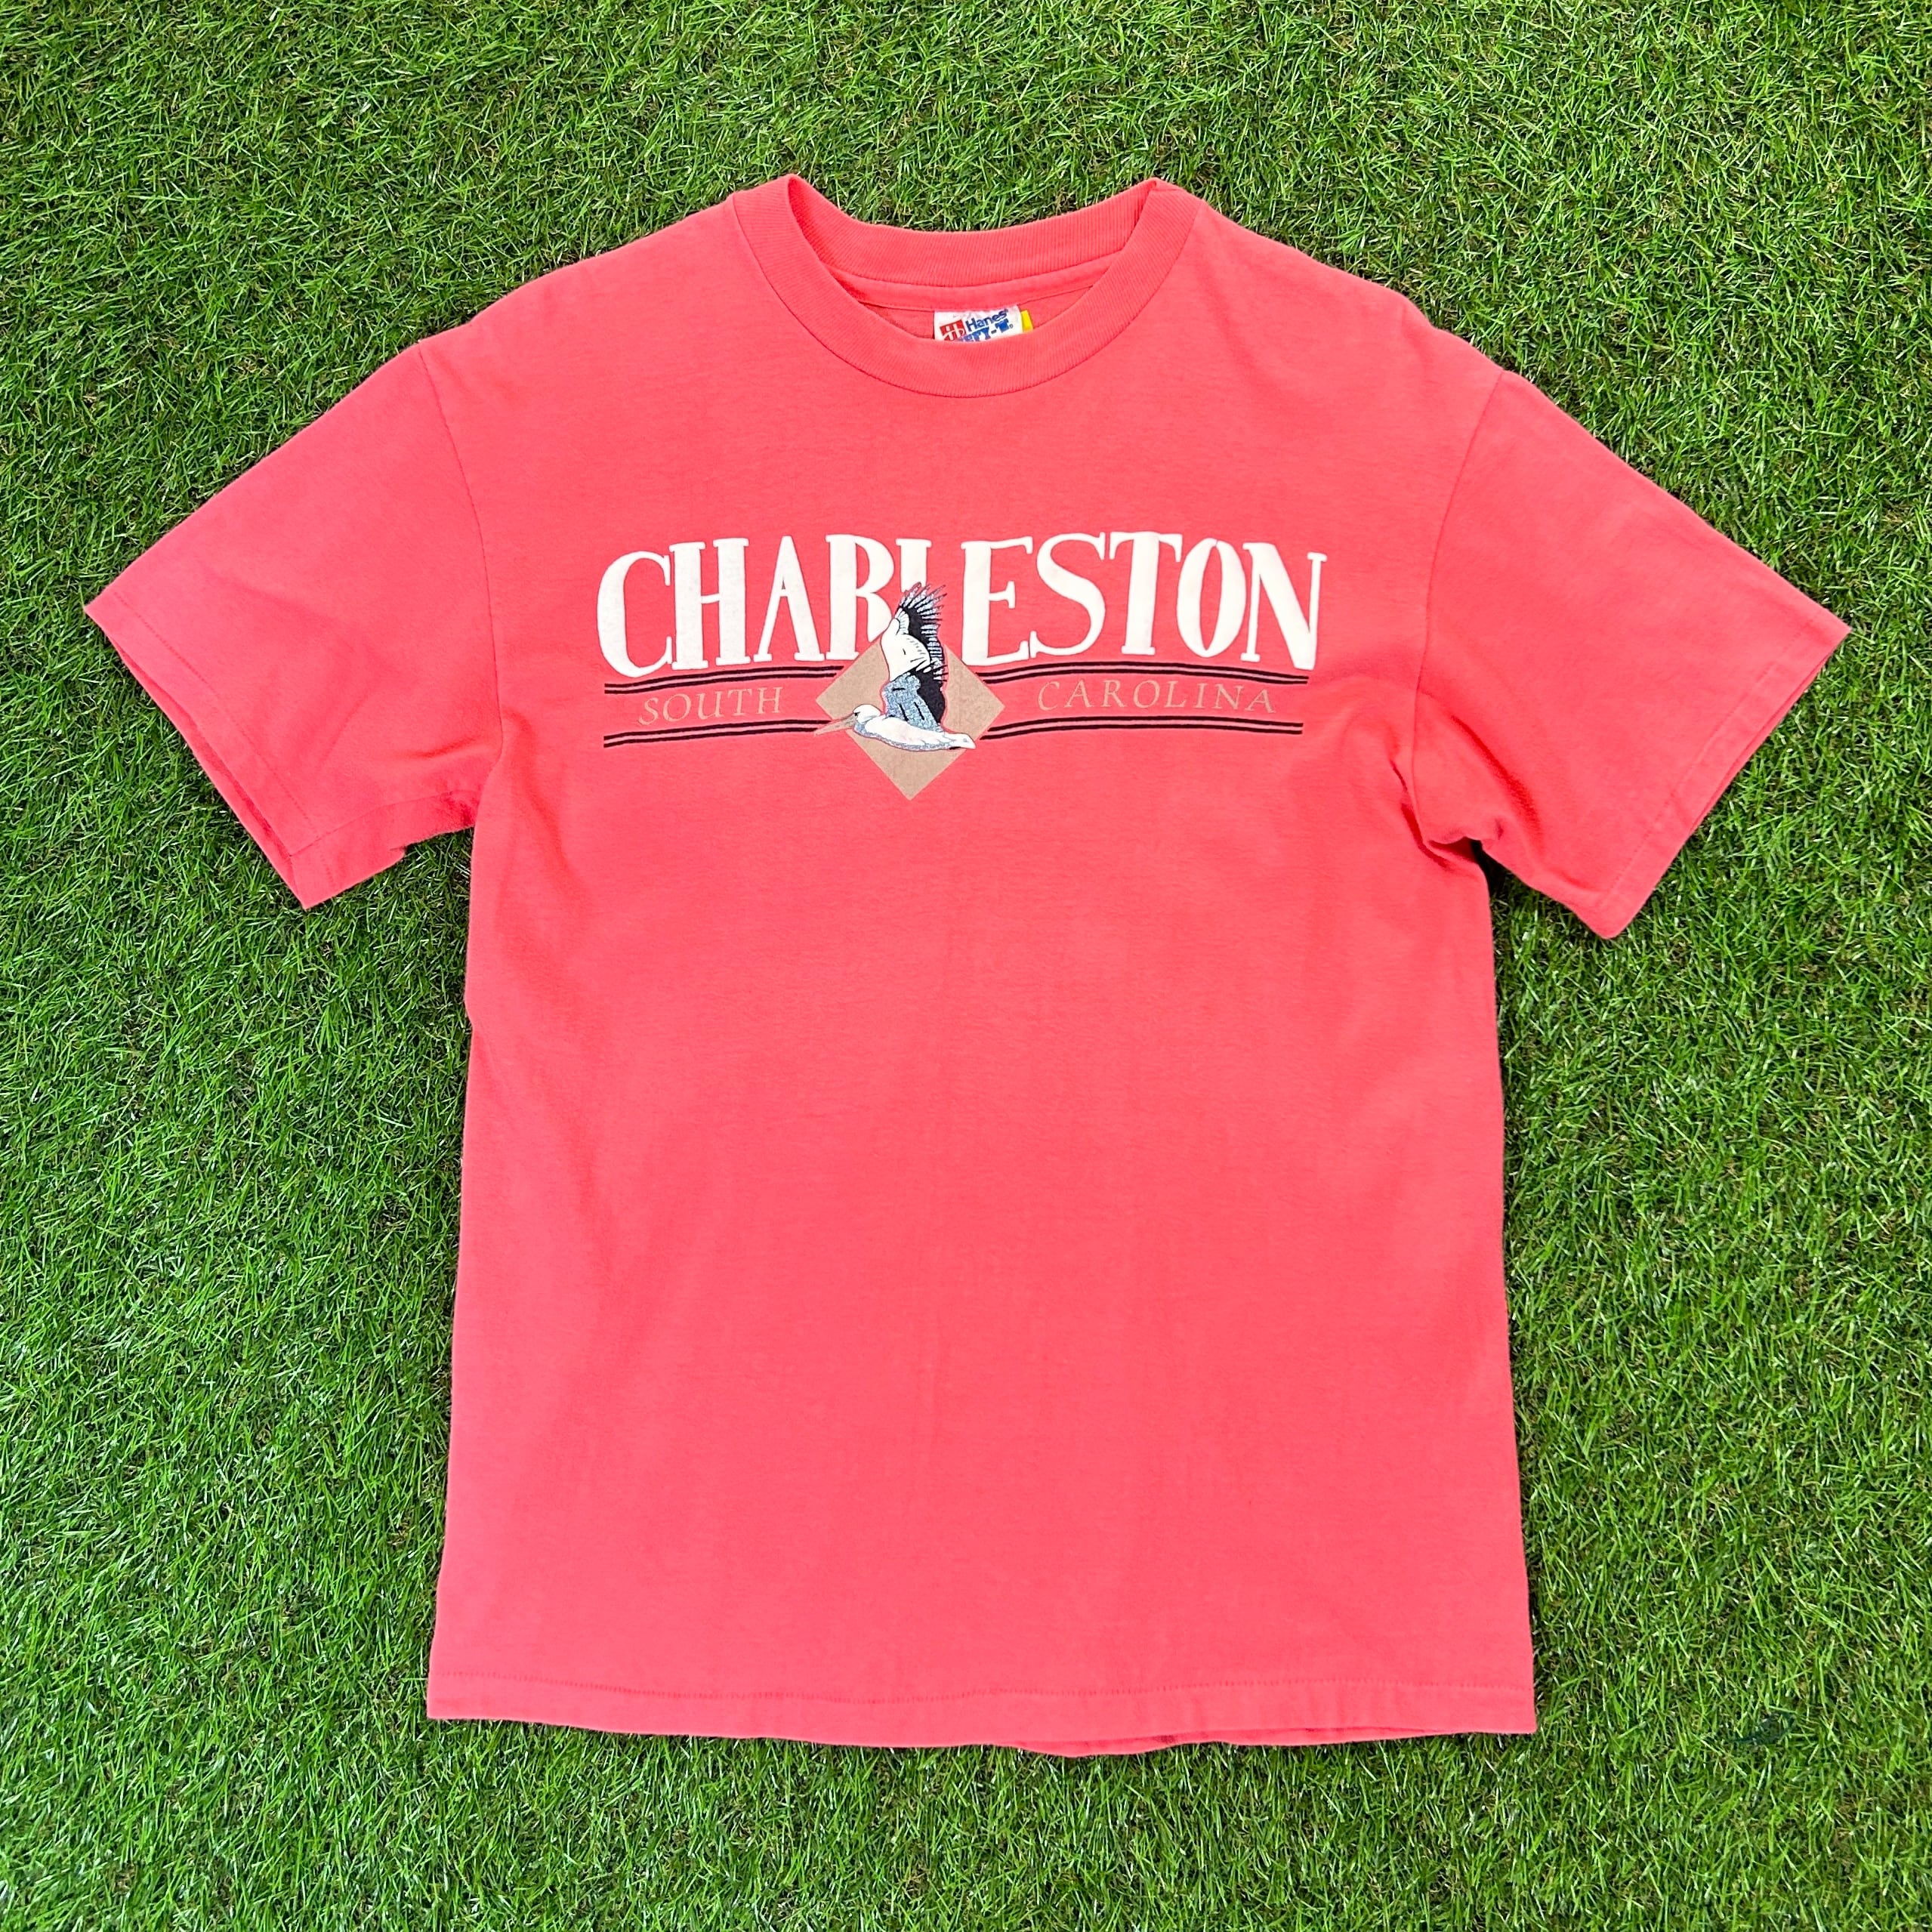 Unisex s CHARIESTON T Shirt / Made In USA 古着 Vintage